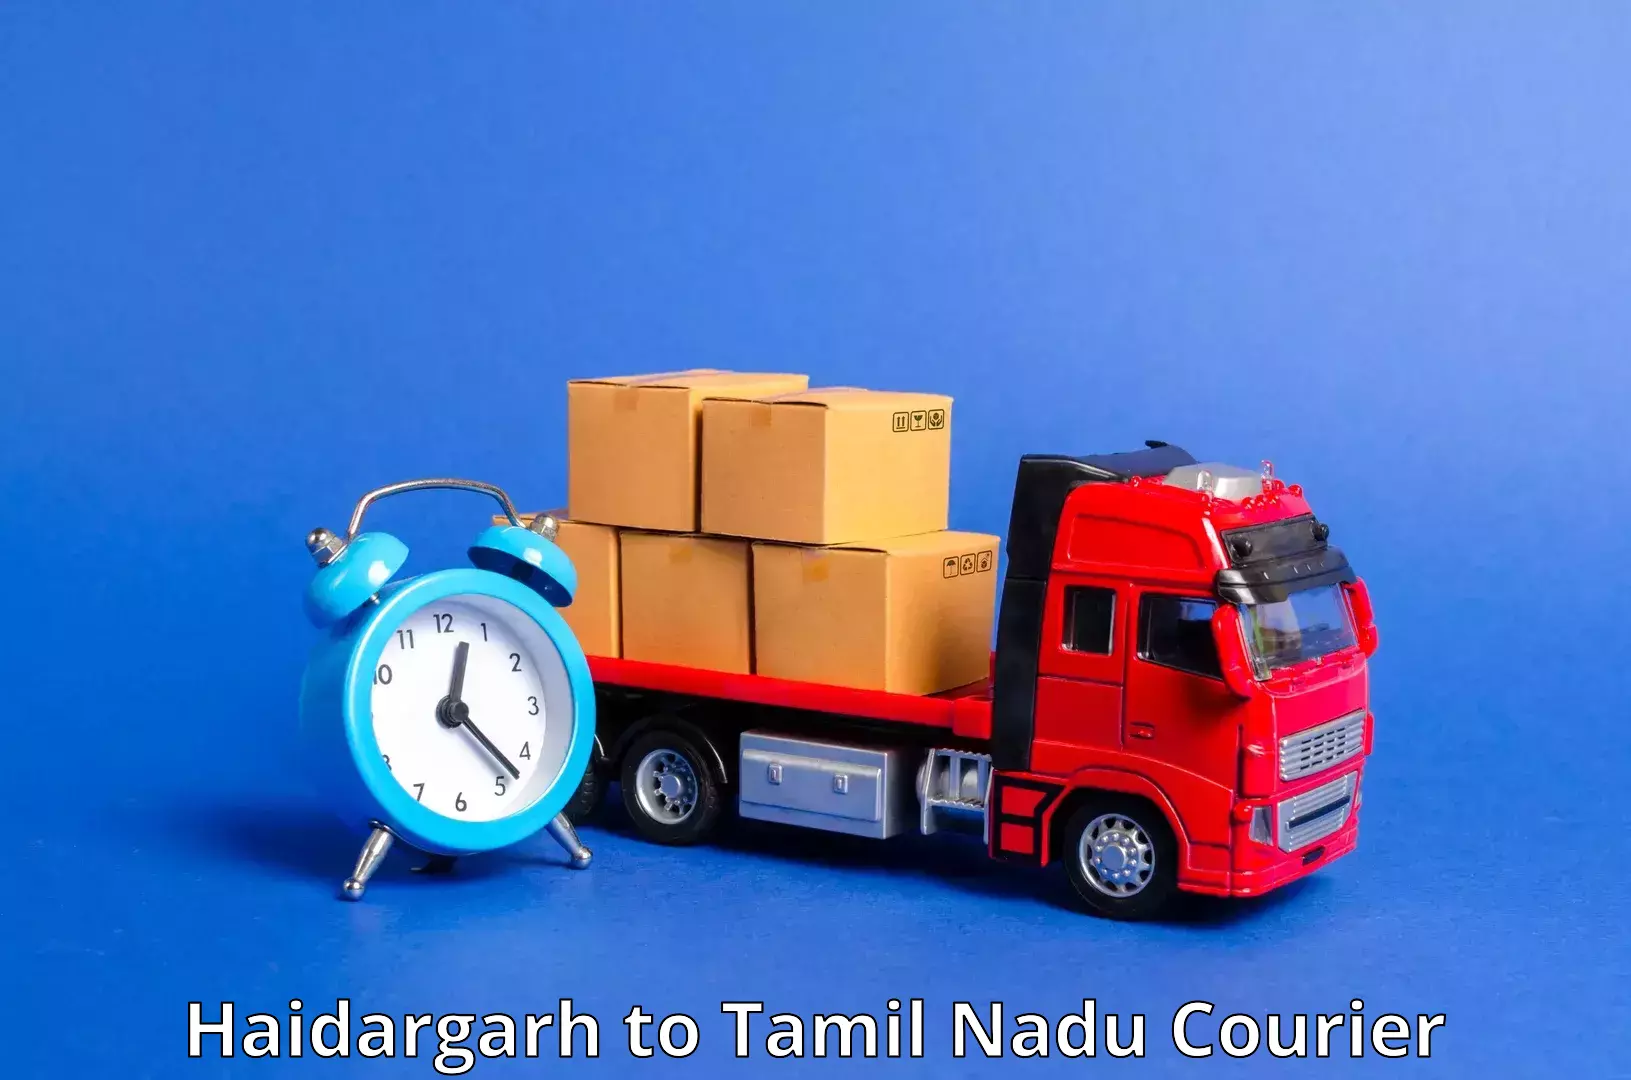 Advanced freight services Haidargarh to Shanmugha Arts Science Technology and Research Academy Thanjavur